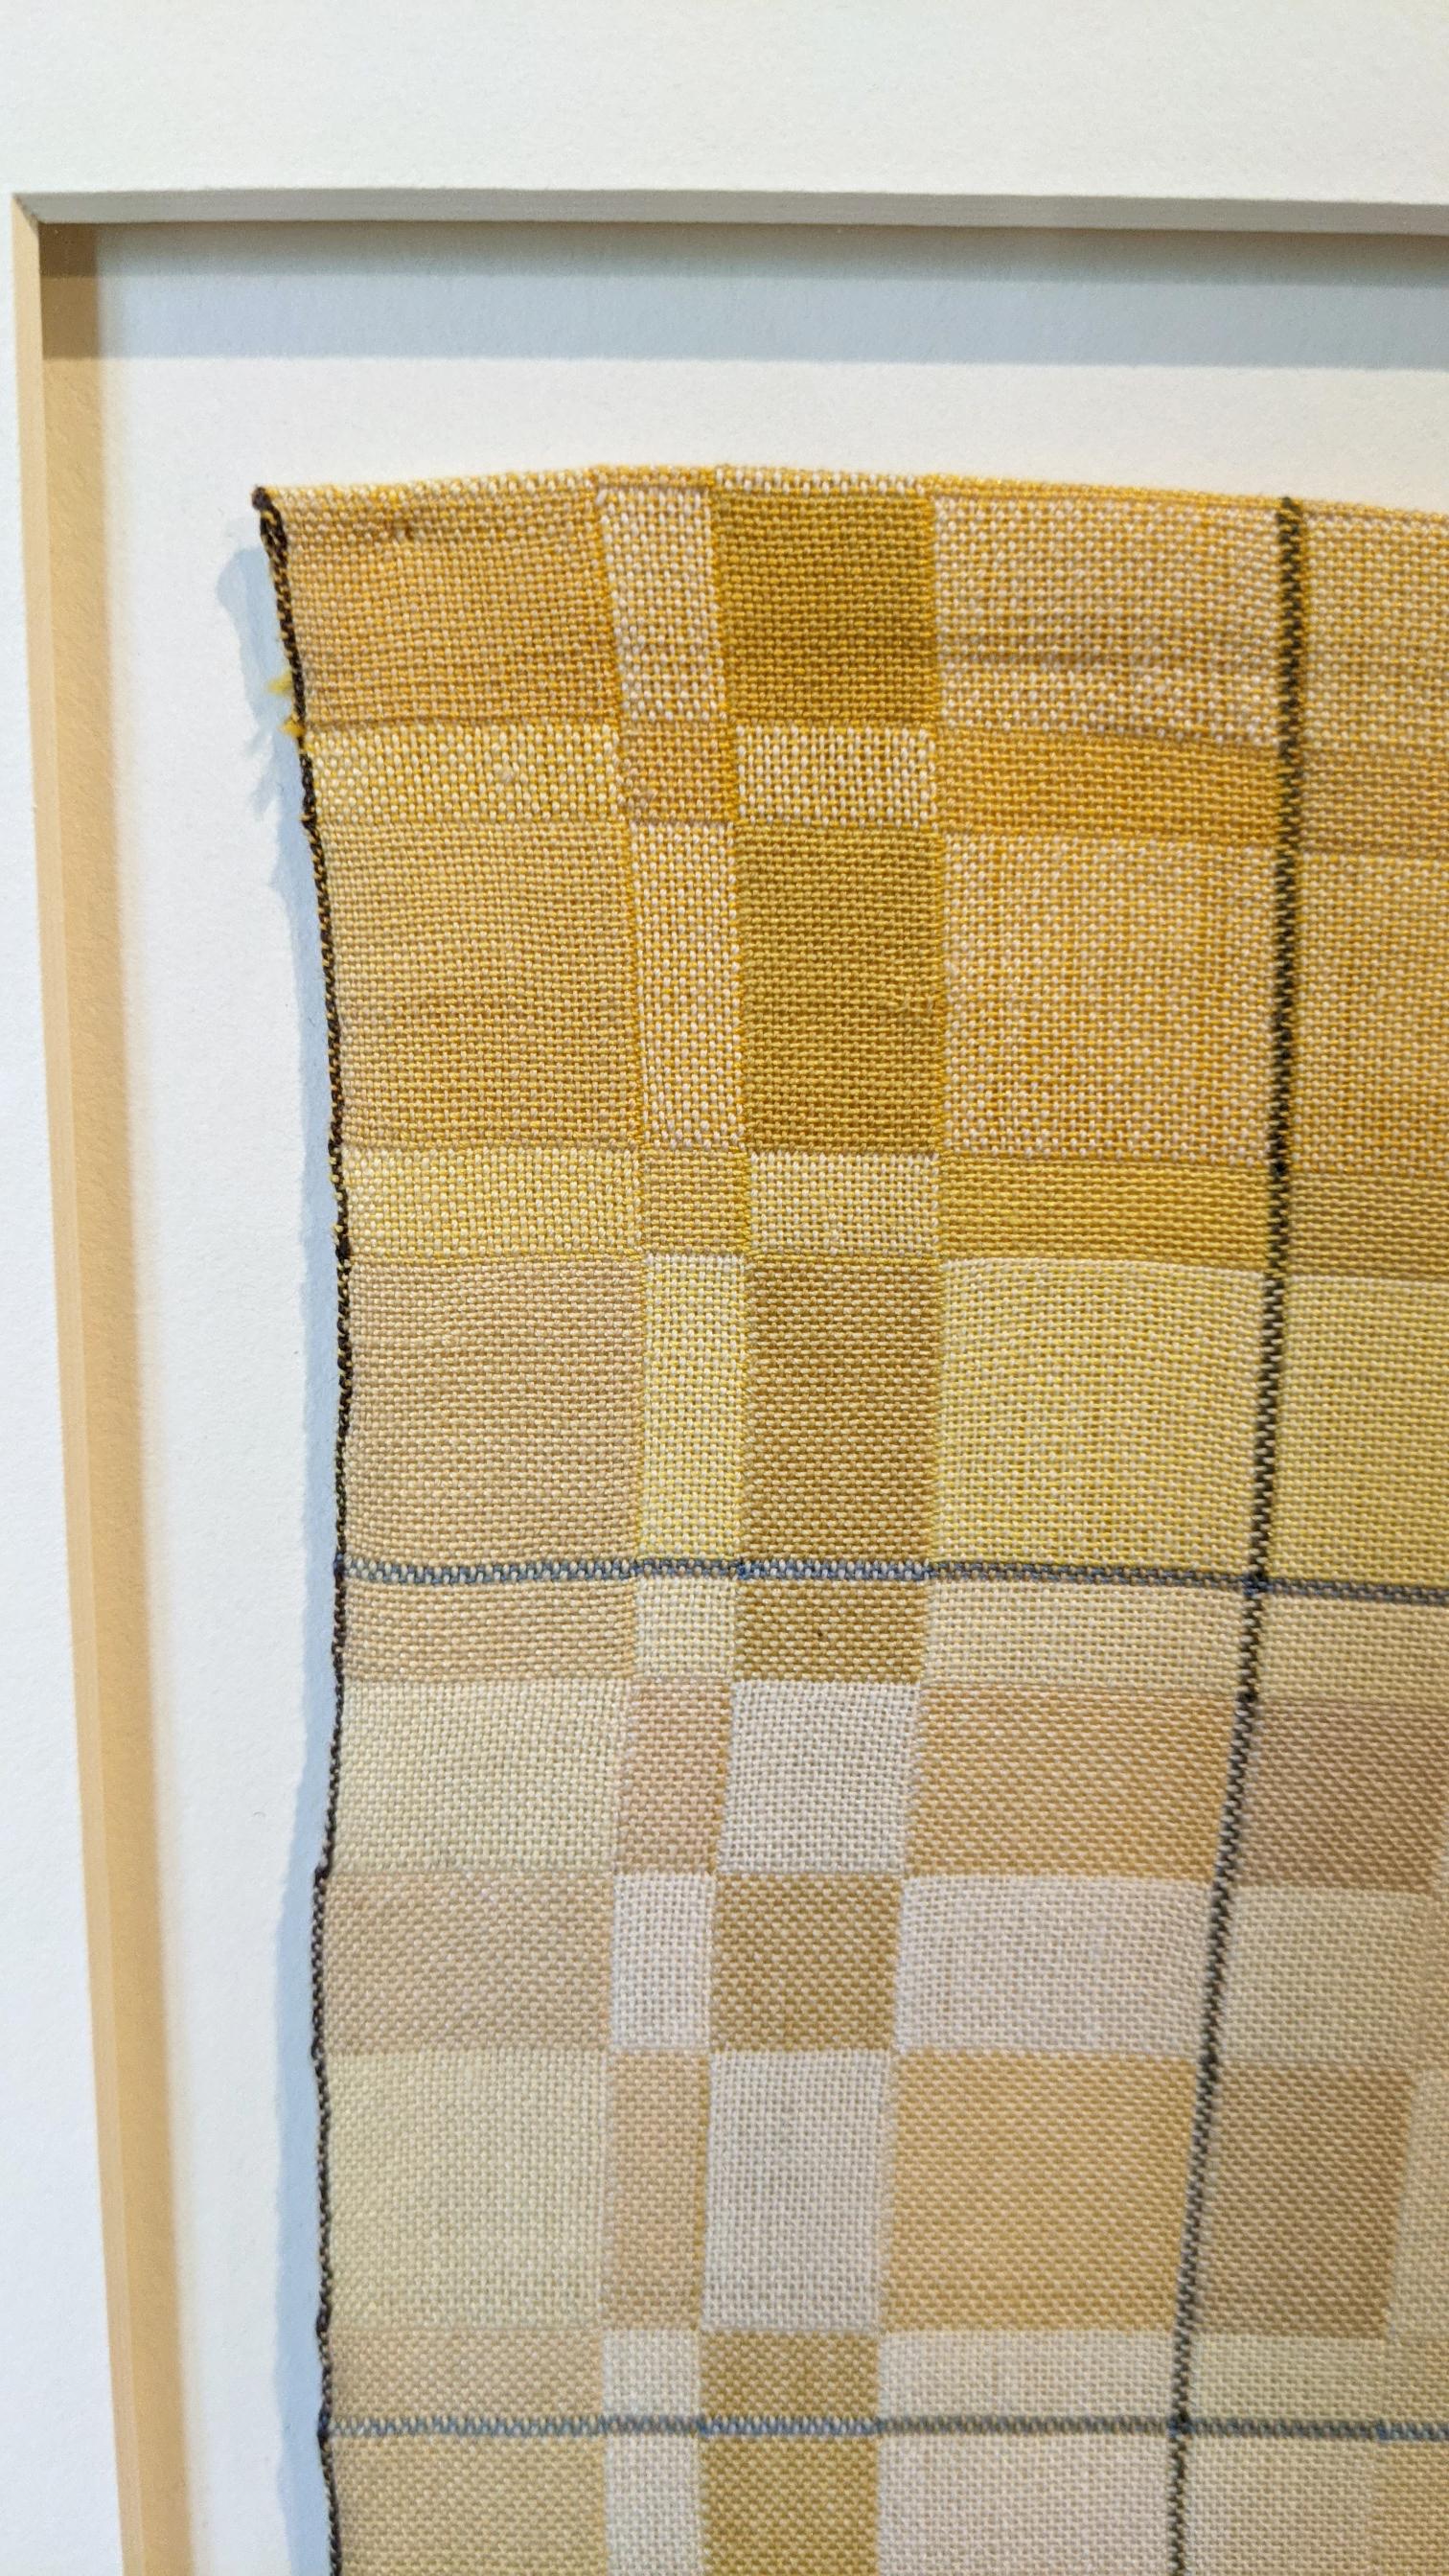 November Gold, 11.5 x 17 inches (Framed size: 19 x 24 inches), fiber cotton sewing thread & gold leaf, $1,600

Sharon Alderman has published two weaving instructional books and traveled the world conducting workshops about the techniques she has